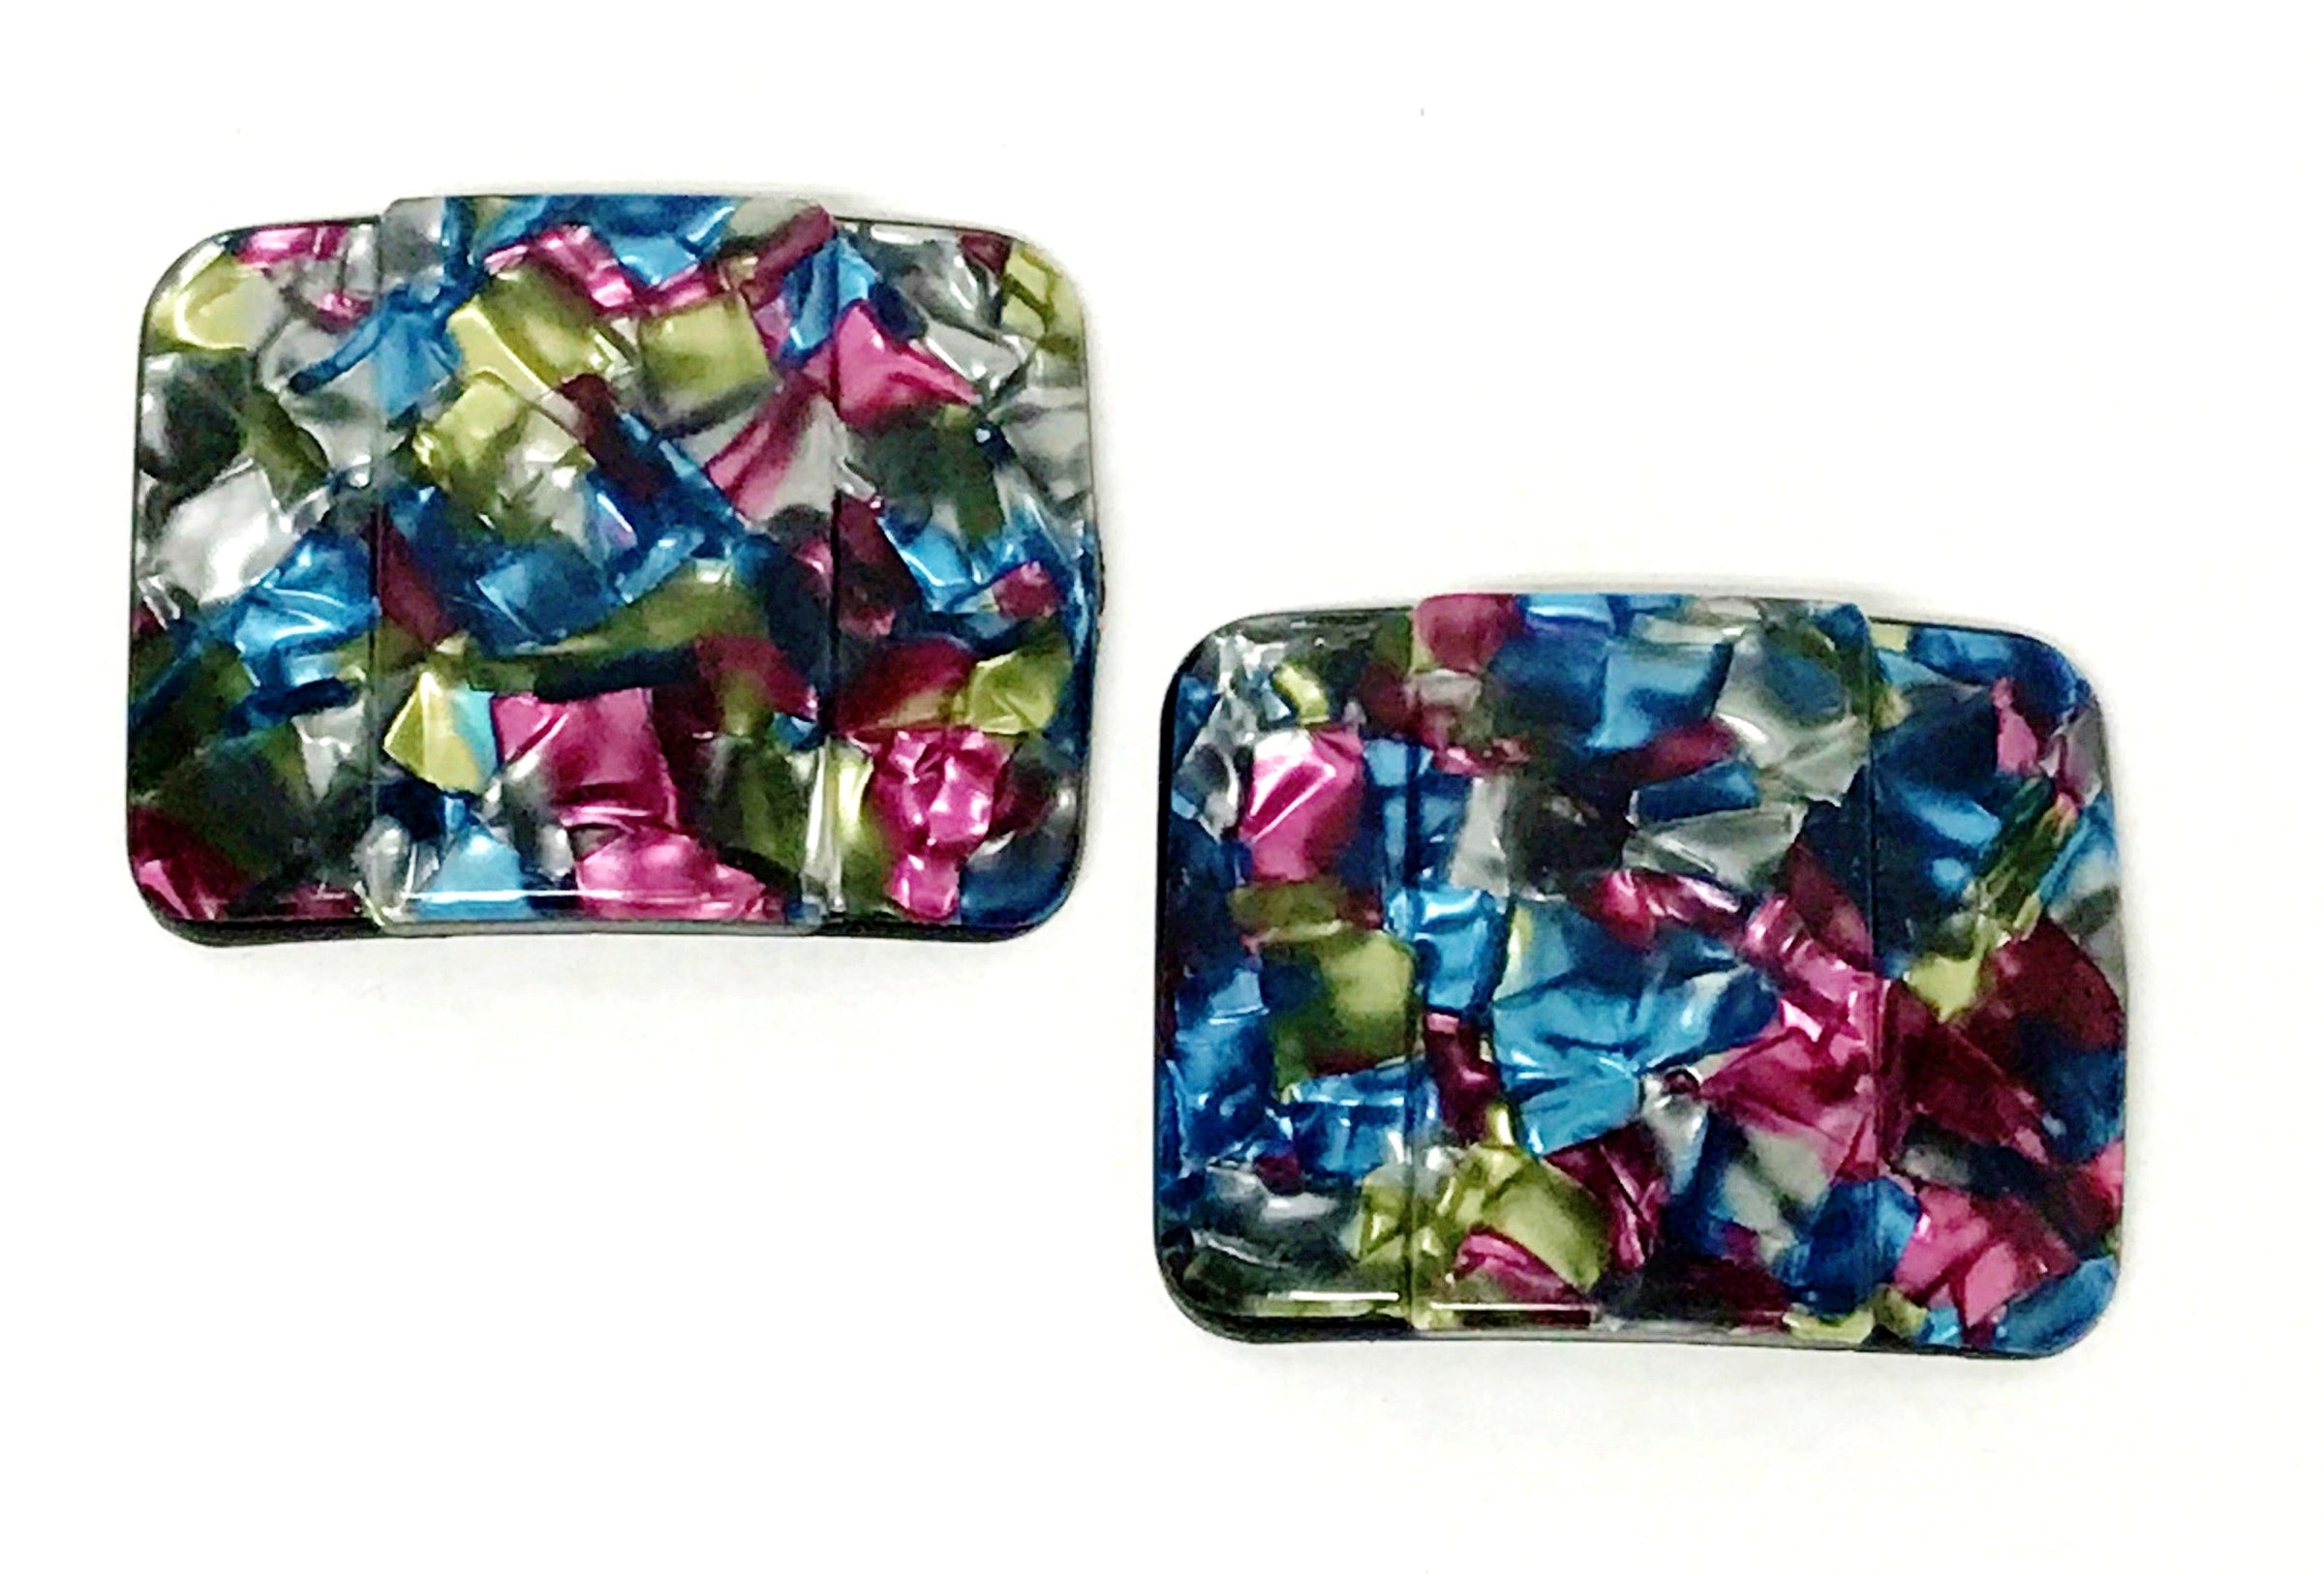 Vintage Lucite Multi-Colored Shoe Clips | France - Hers and His Treasures